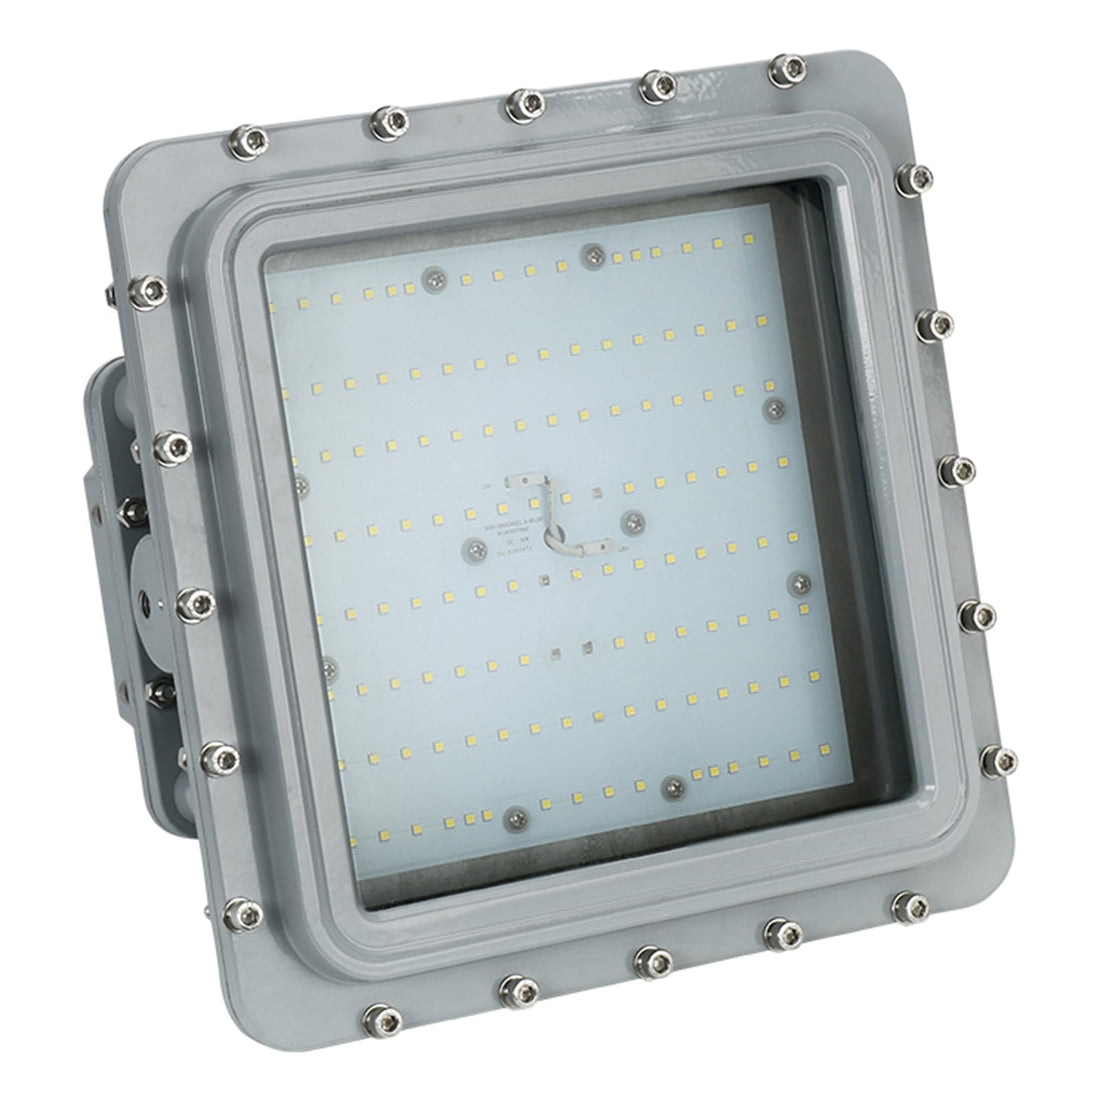 D Series 100W Non-Dimmable LED Explosion Proof Flood Light: Bright and Reliable Lighting Solution for Hazardous Locations with 13500LM and IP66 Protection, Ideal for Industrial Environments